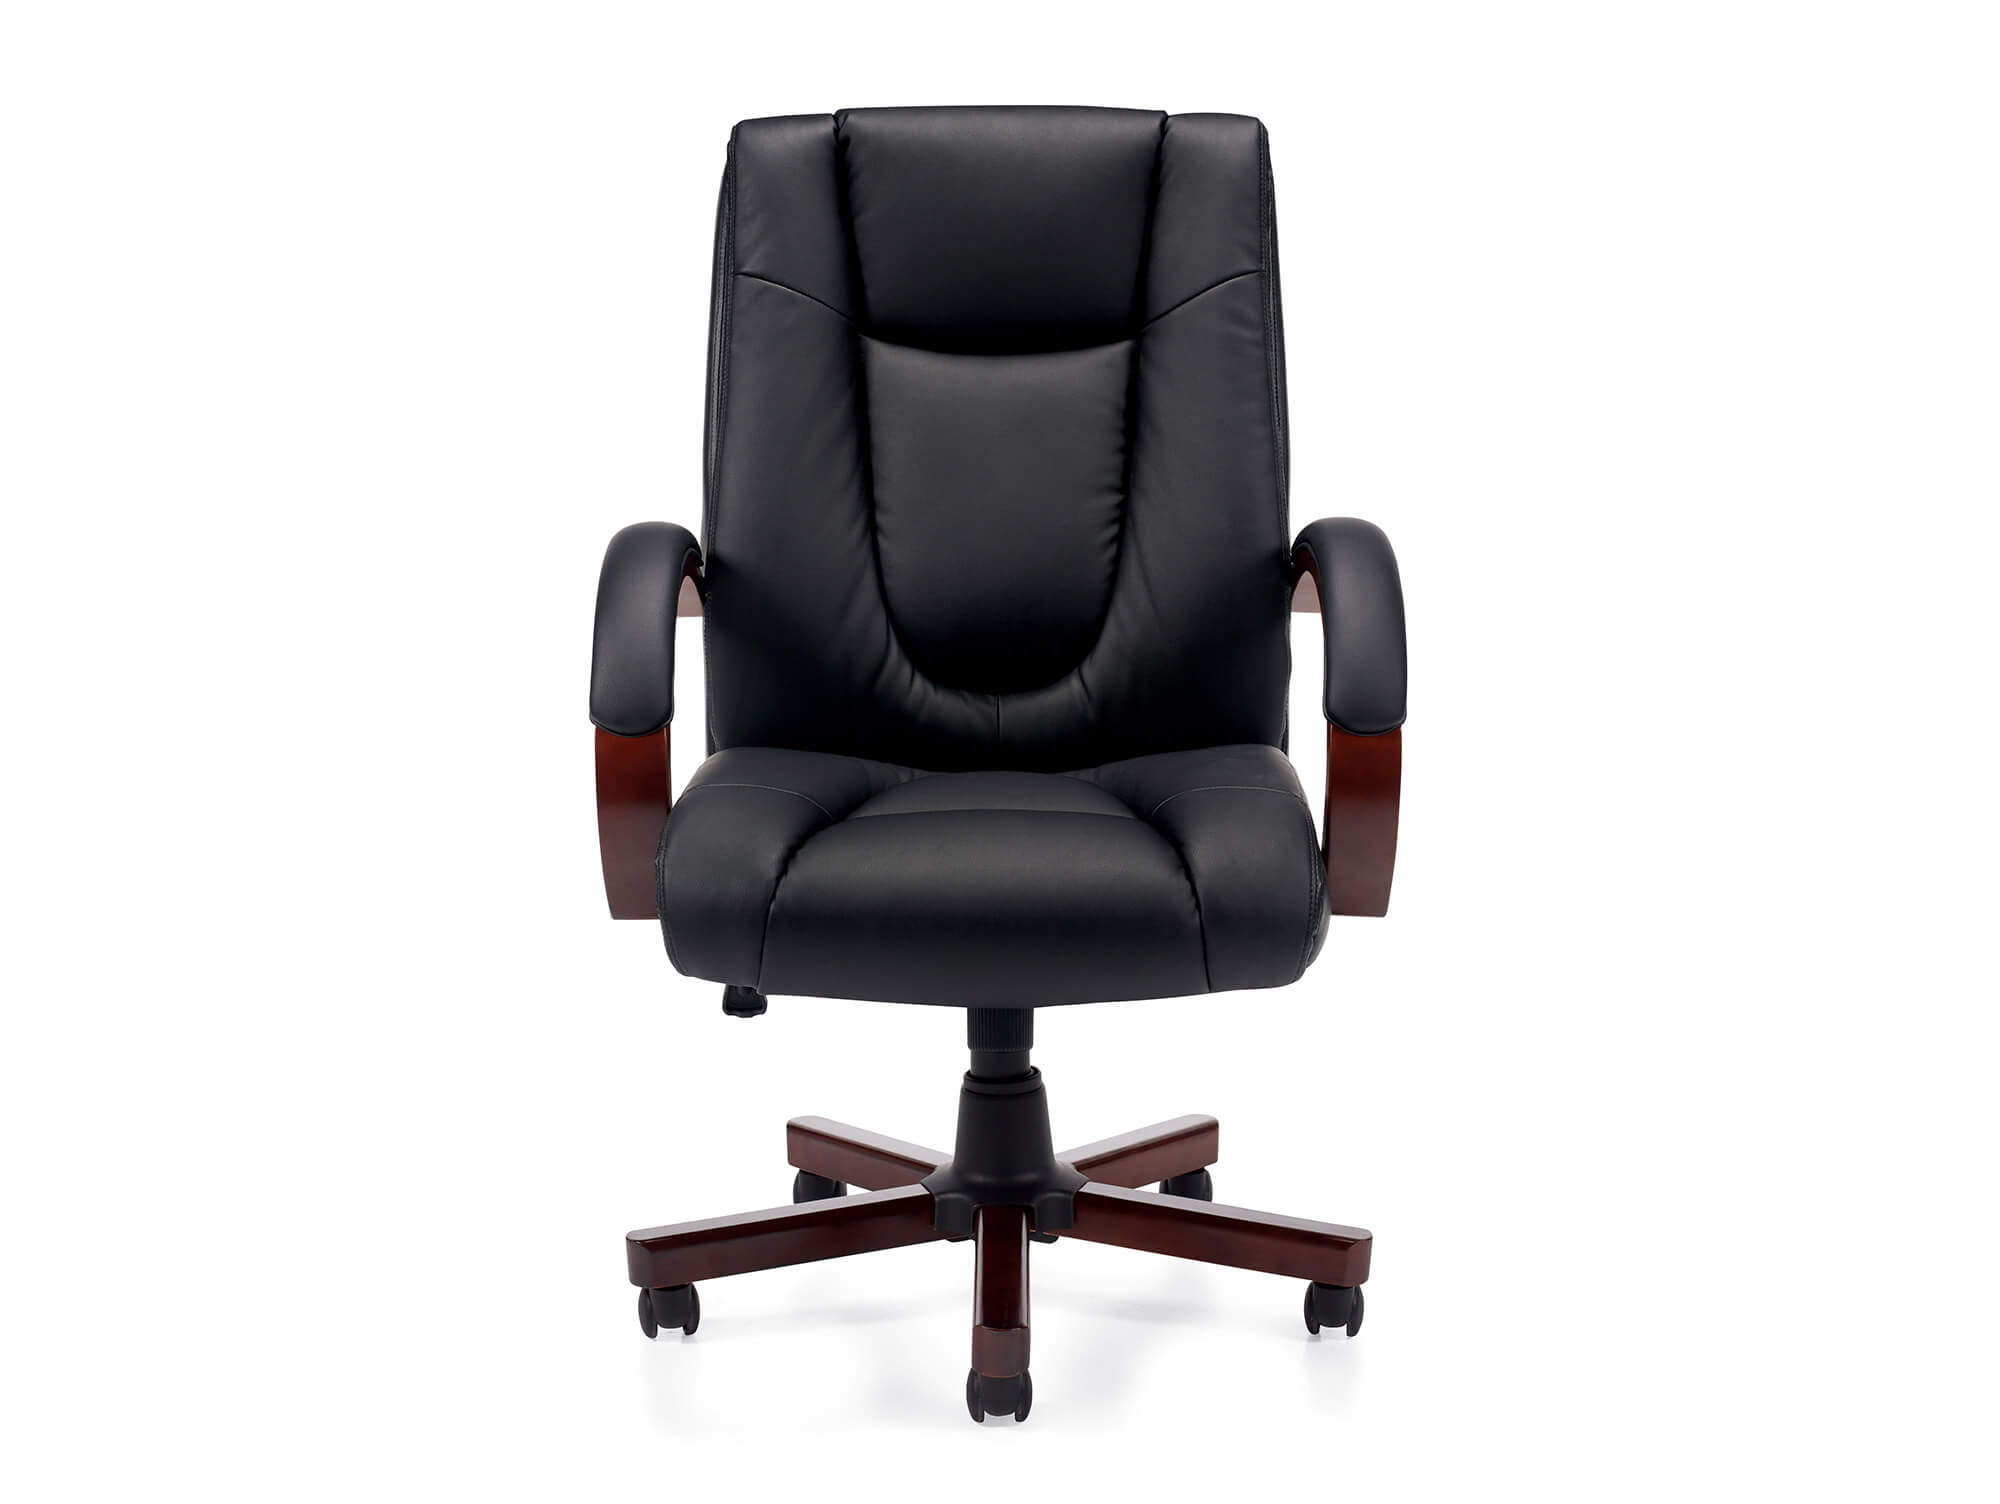 Wood office chair front